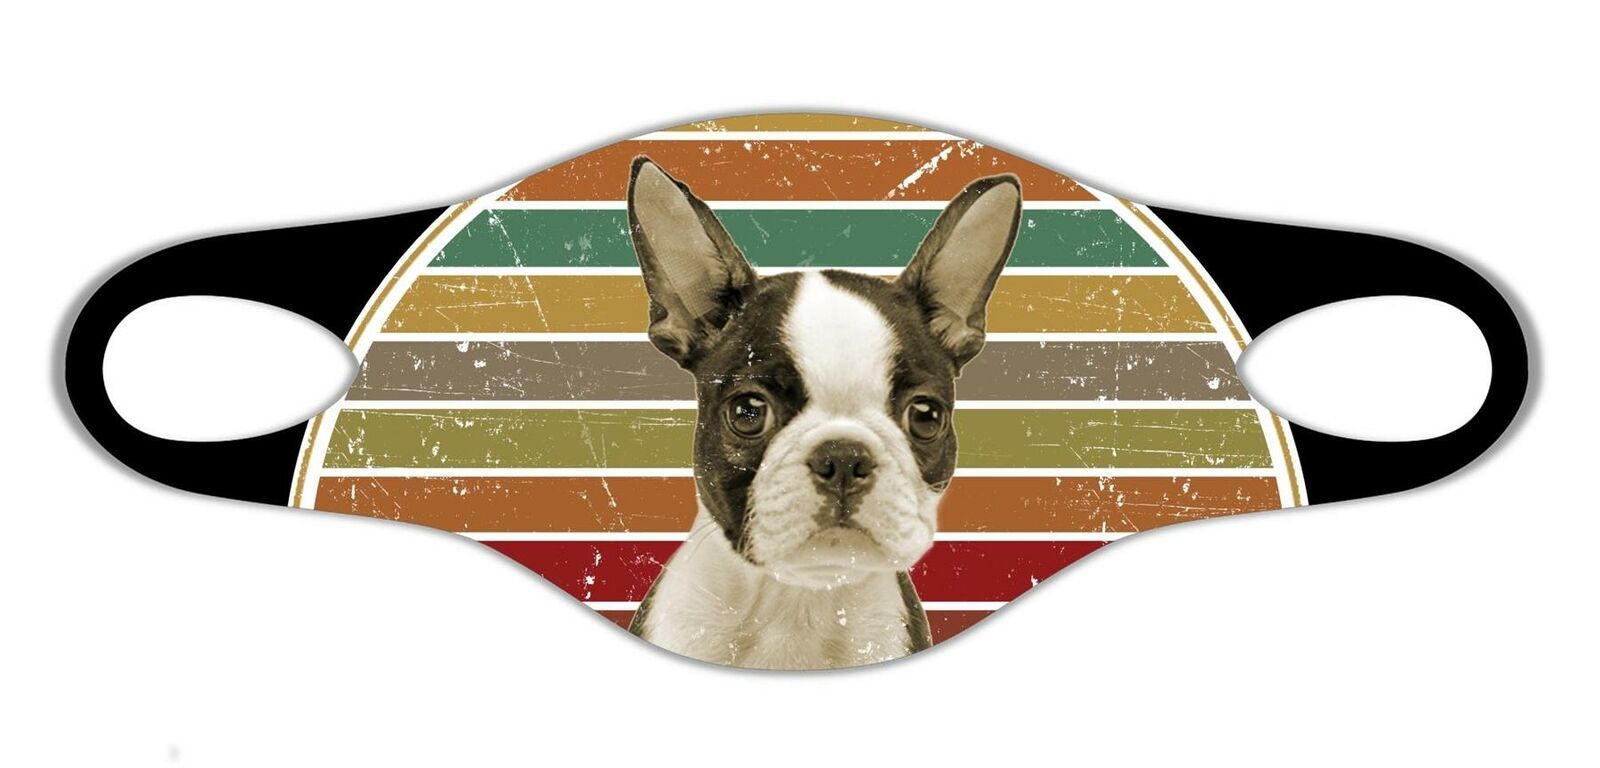 Boston Terrier dog lovers Soft face protective mask easily washed respire airy